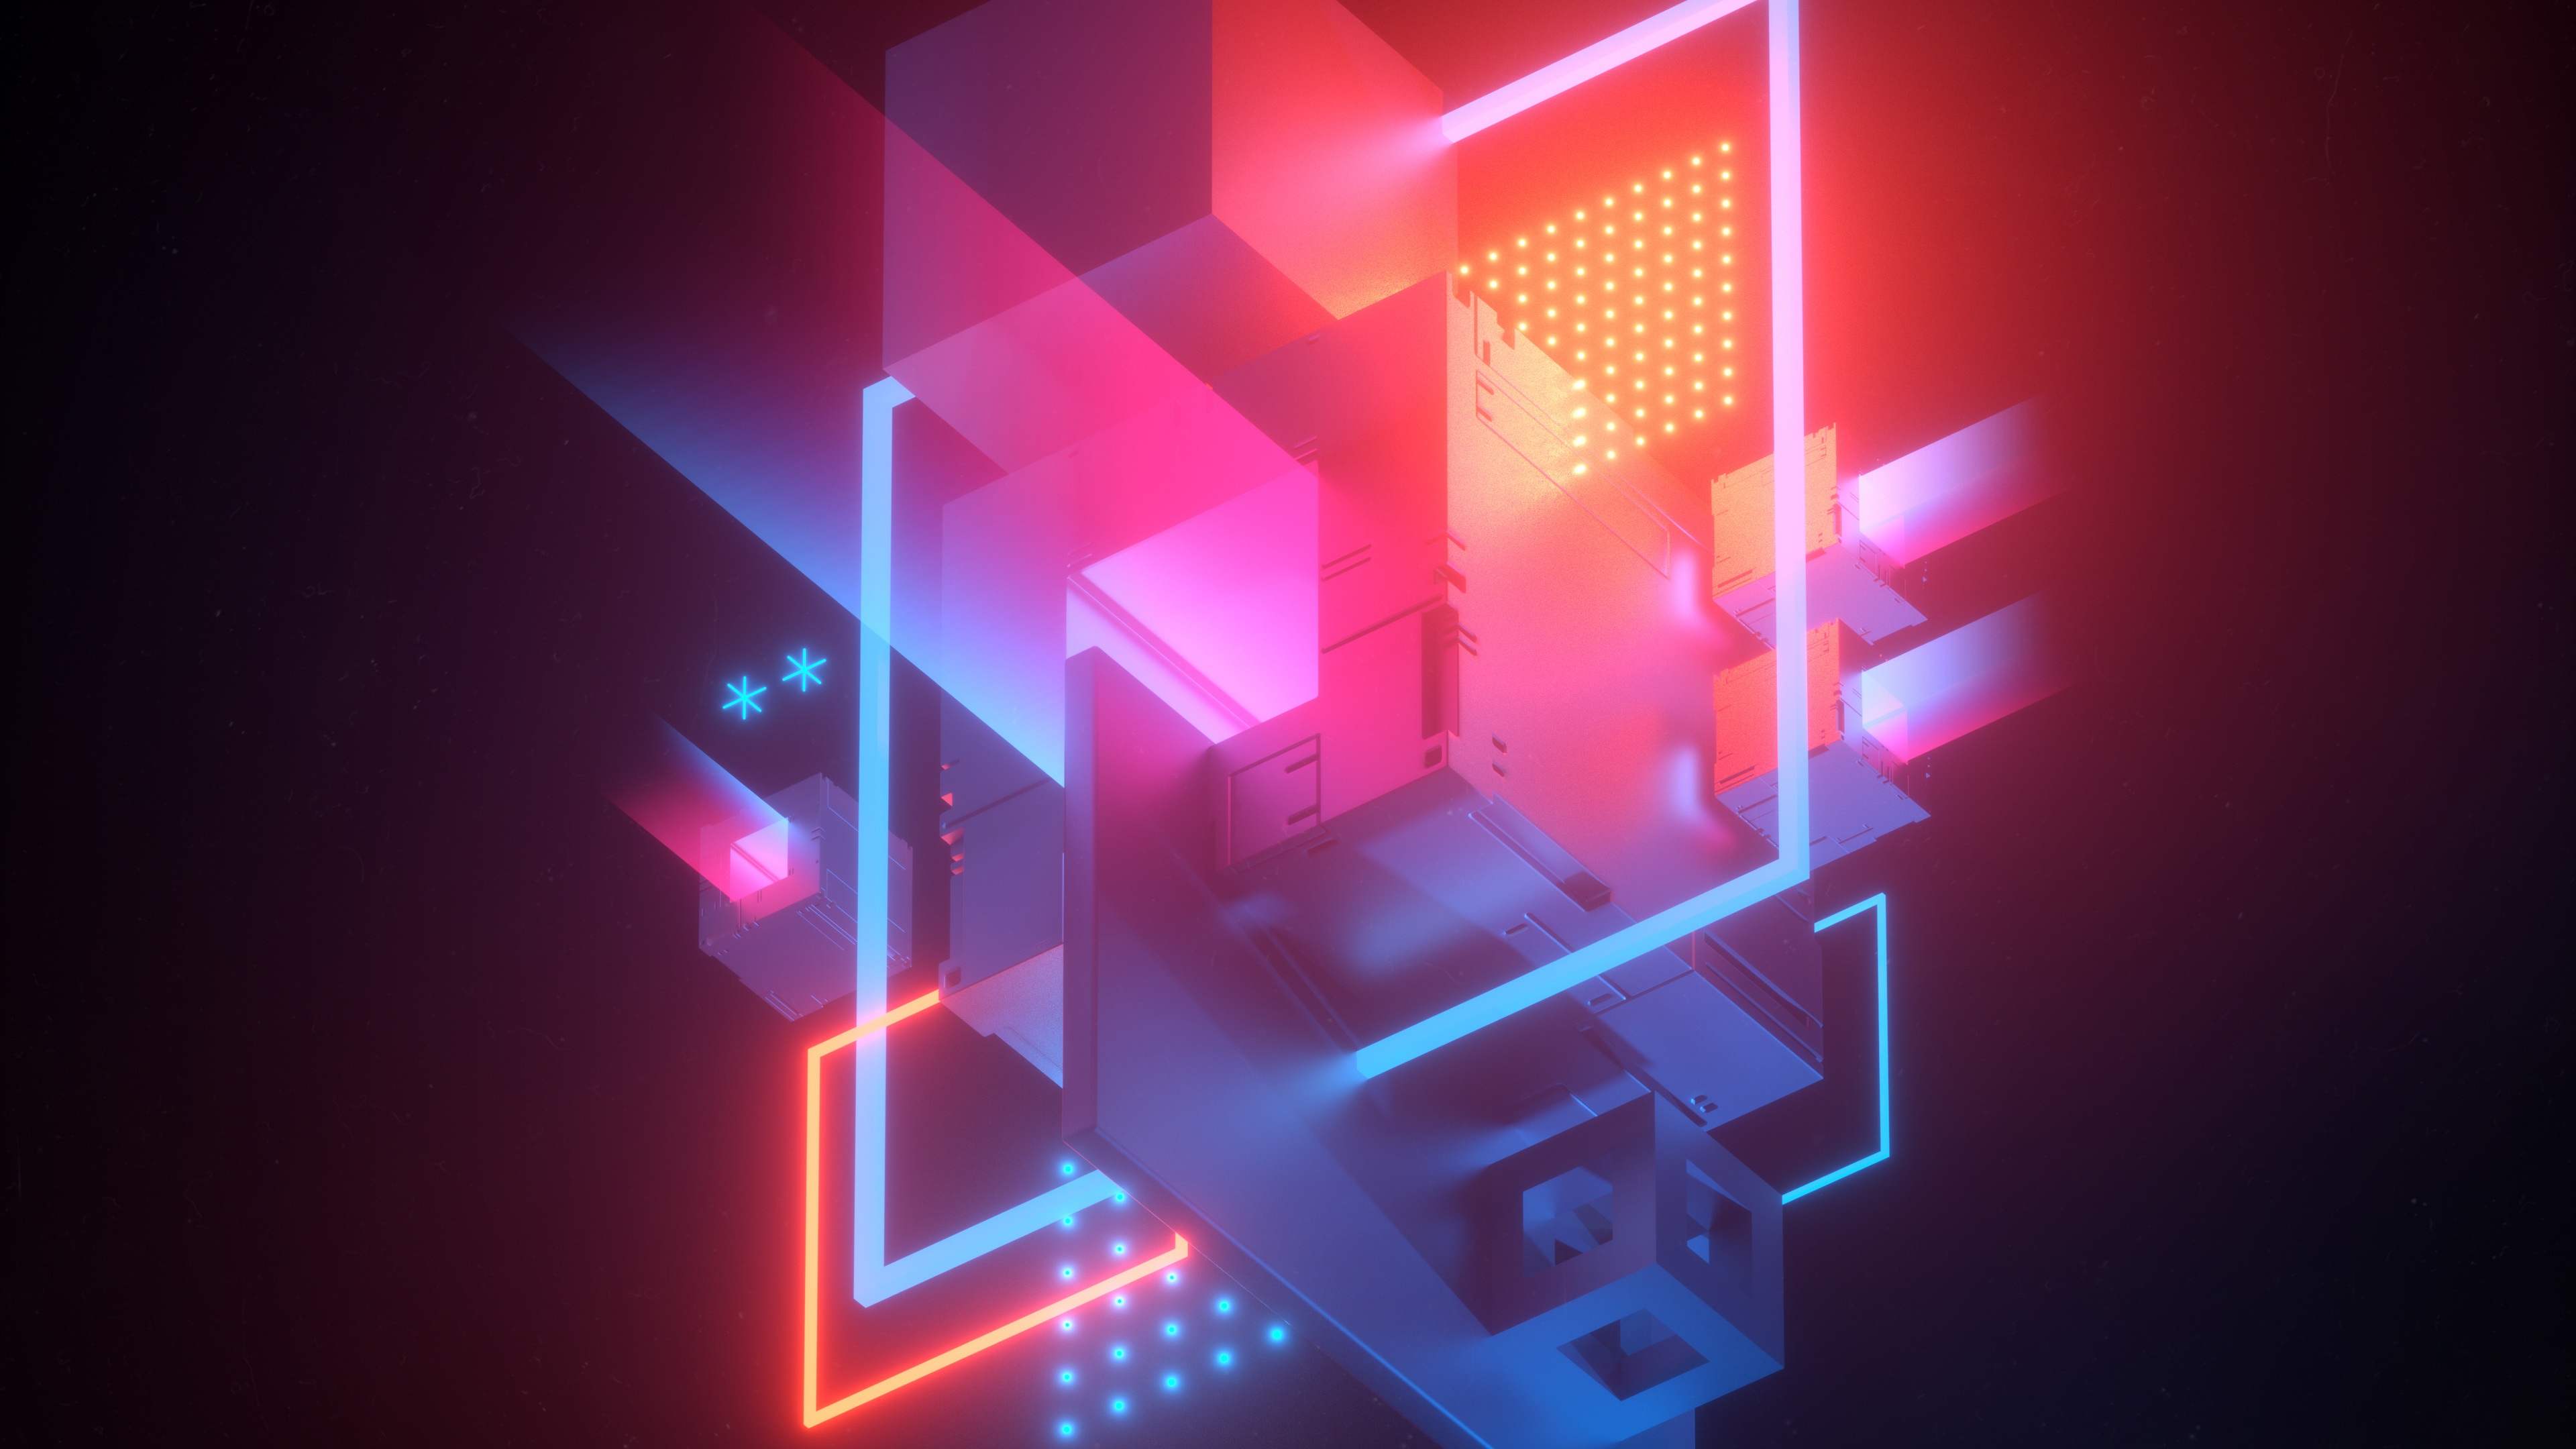 Abstract lights 4k download